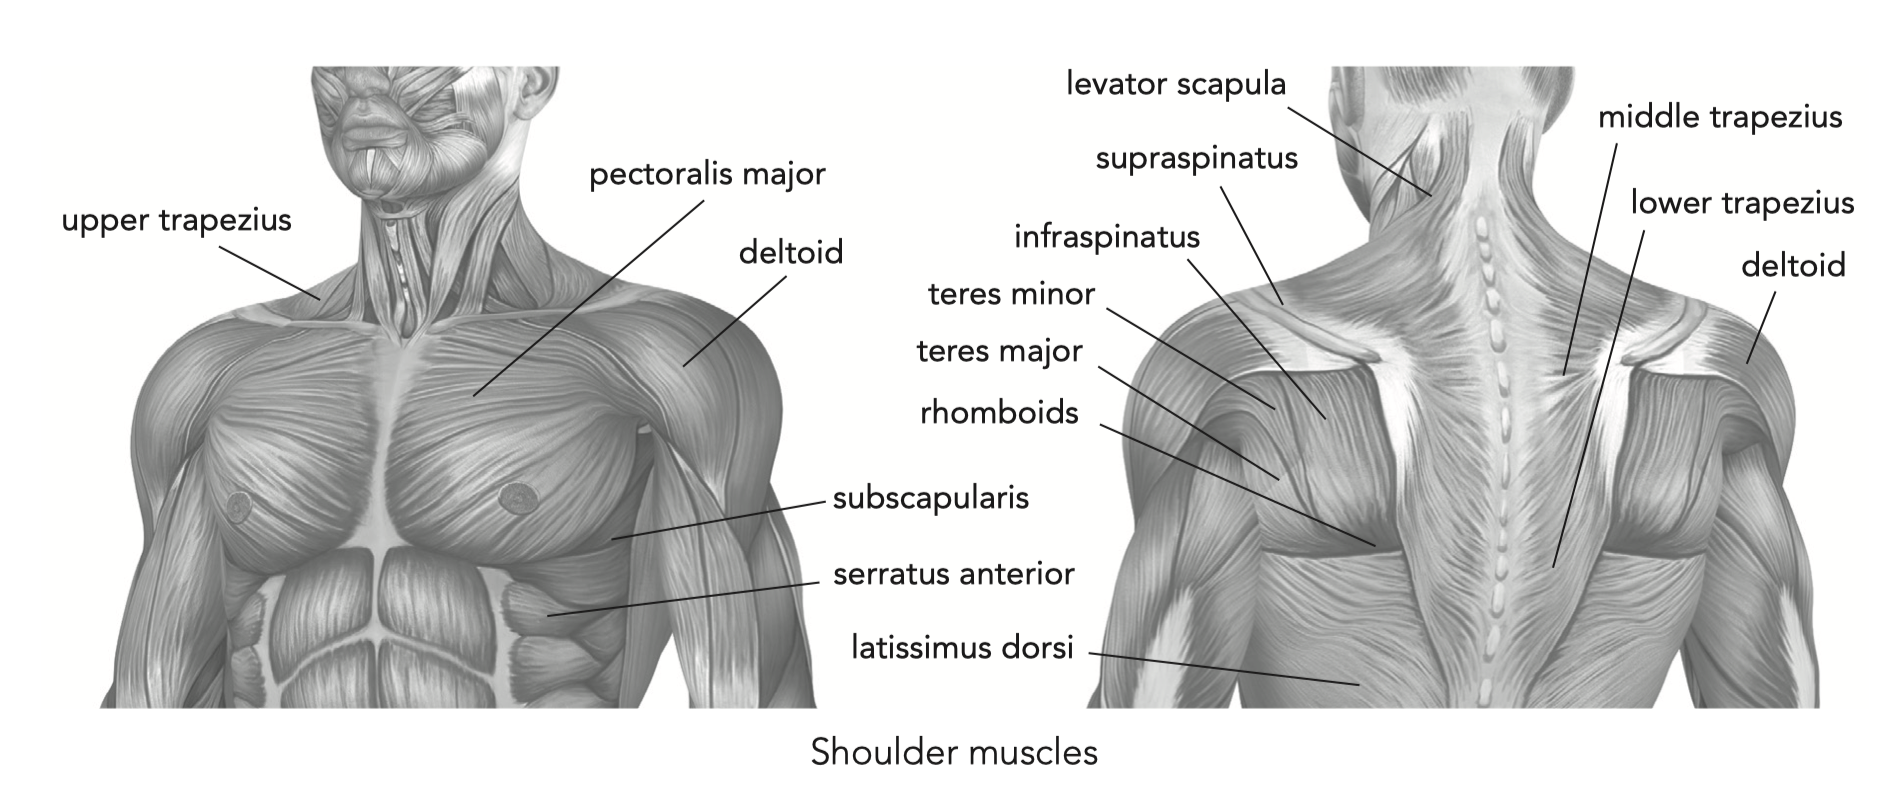 Getting Started with Frozen Shoulder Treatment | Ulysses Press